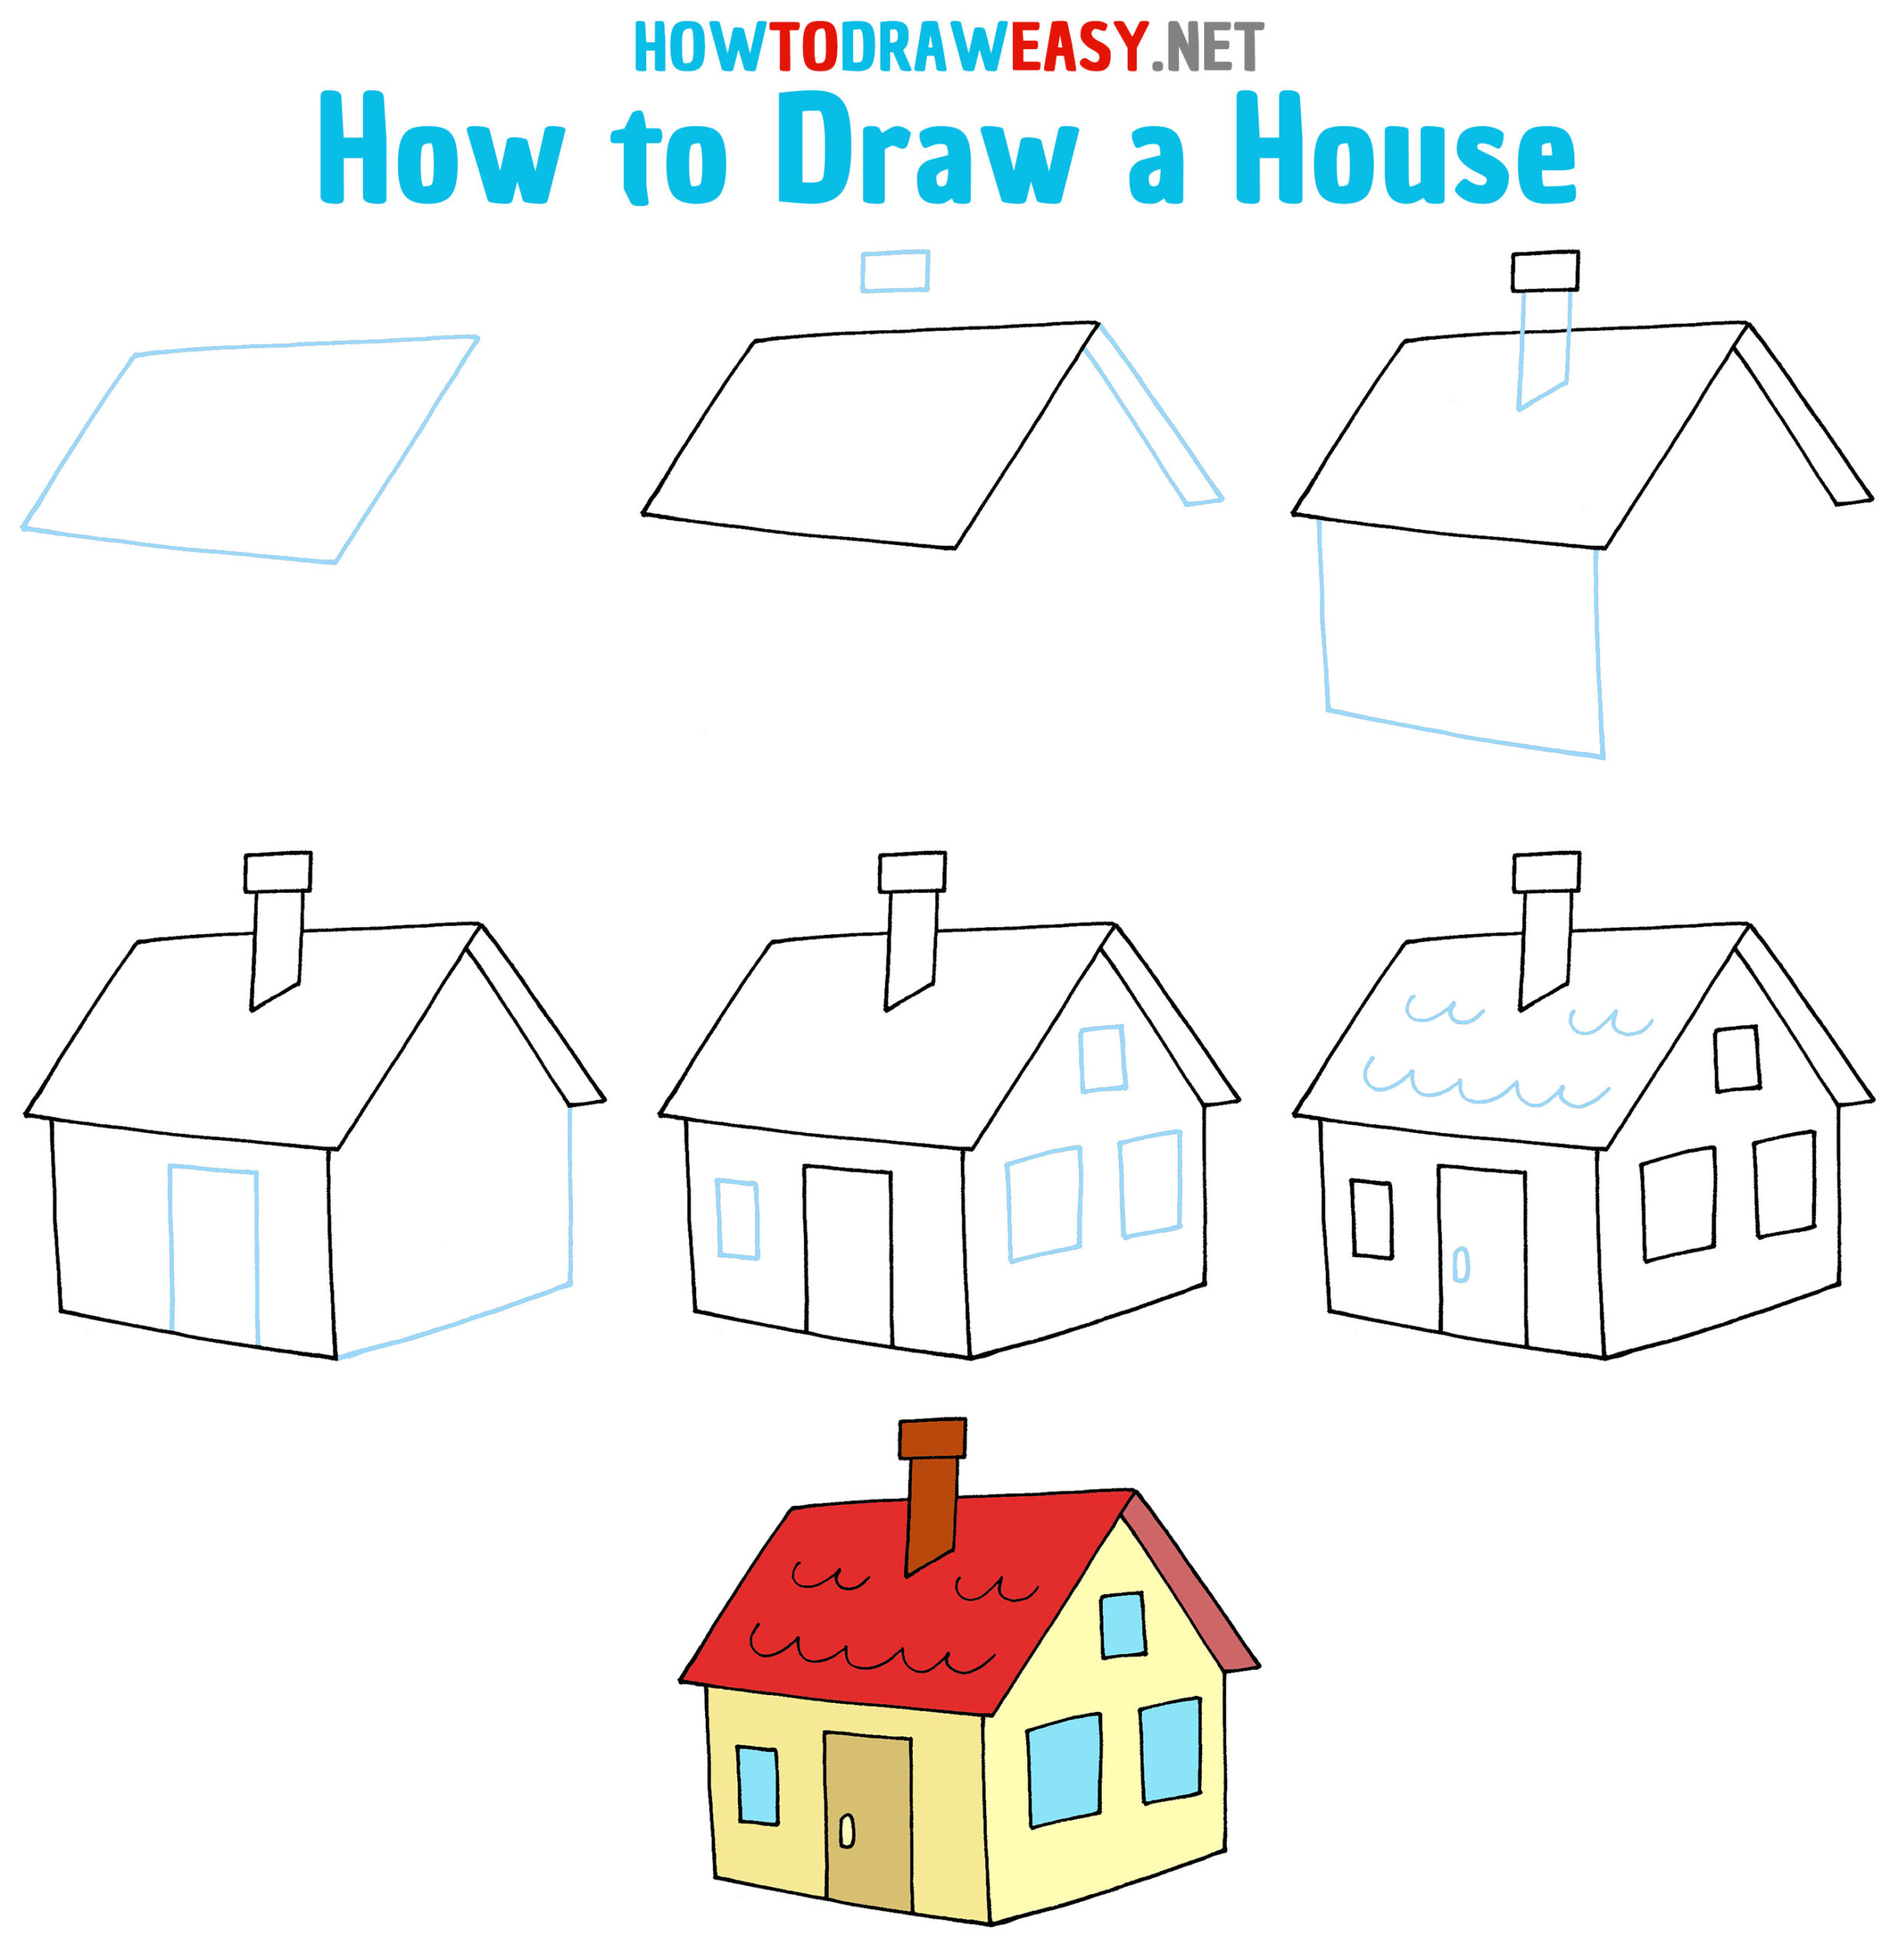 How to Draw a House Step by Step